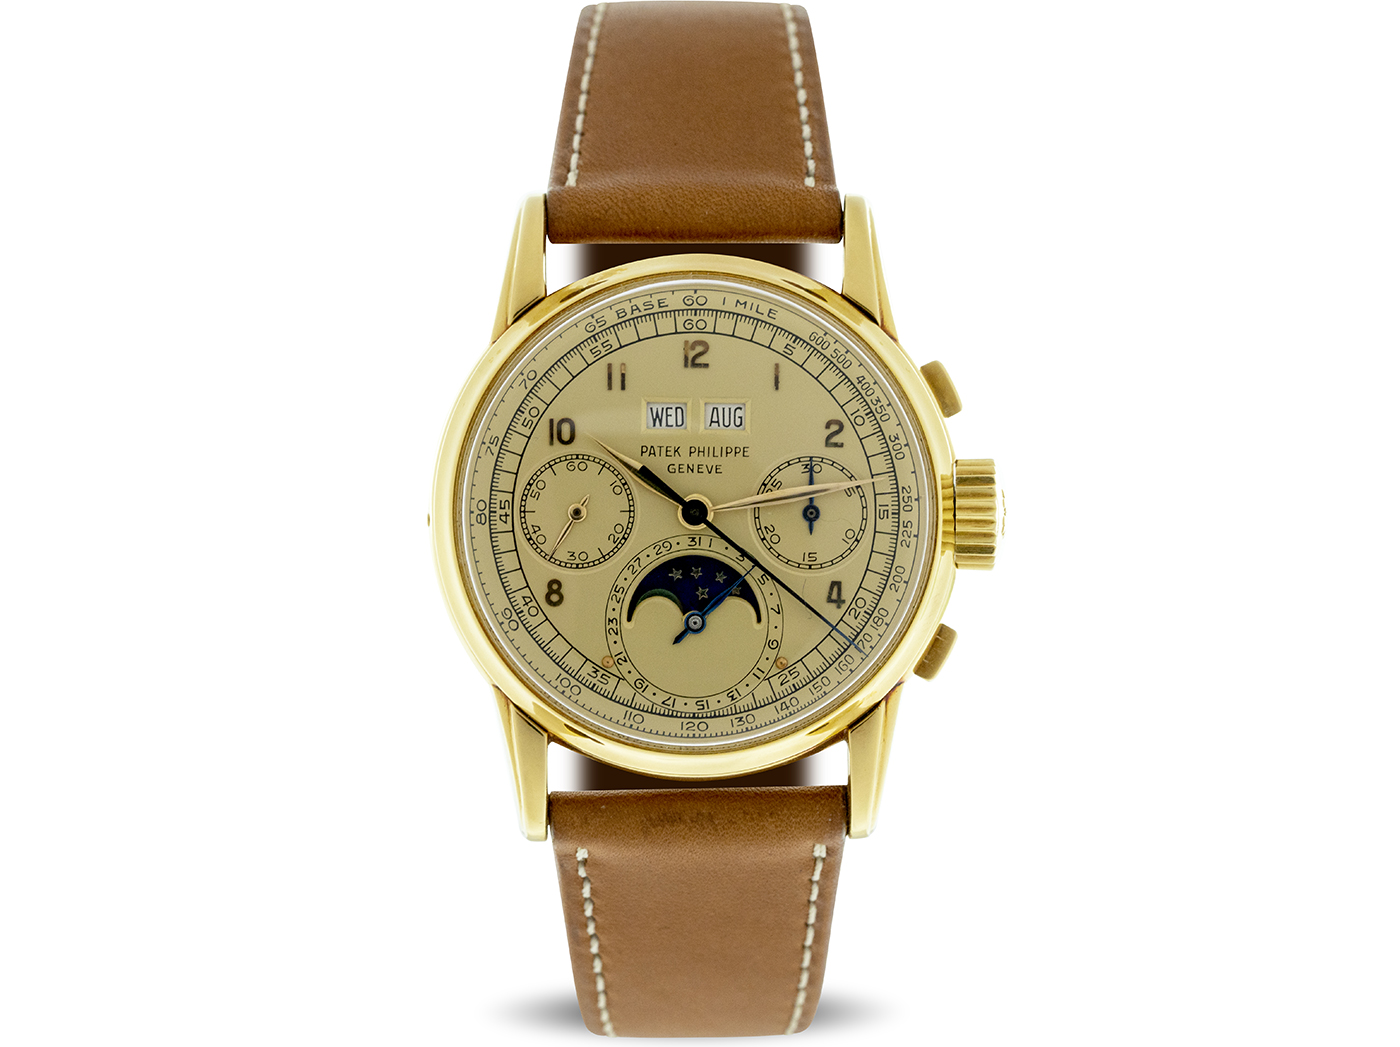 The Patek Philippe Ref. 2499 J, a second-series yellow gold in new-old-stock condition. It is one of the best such known examples.